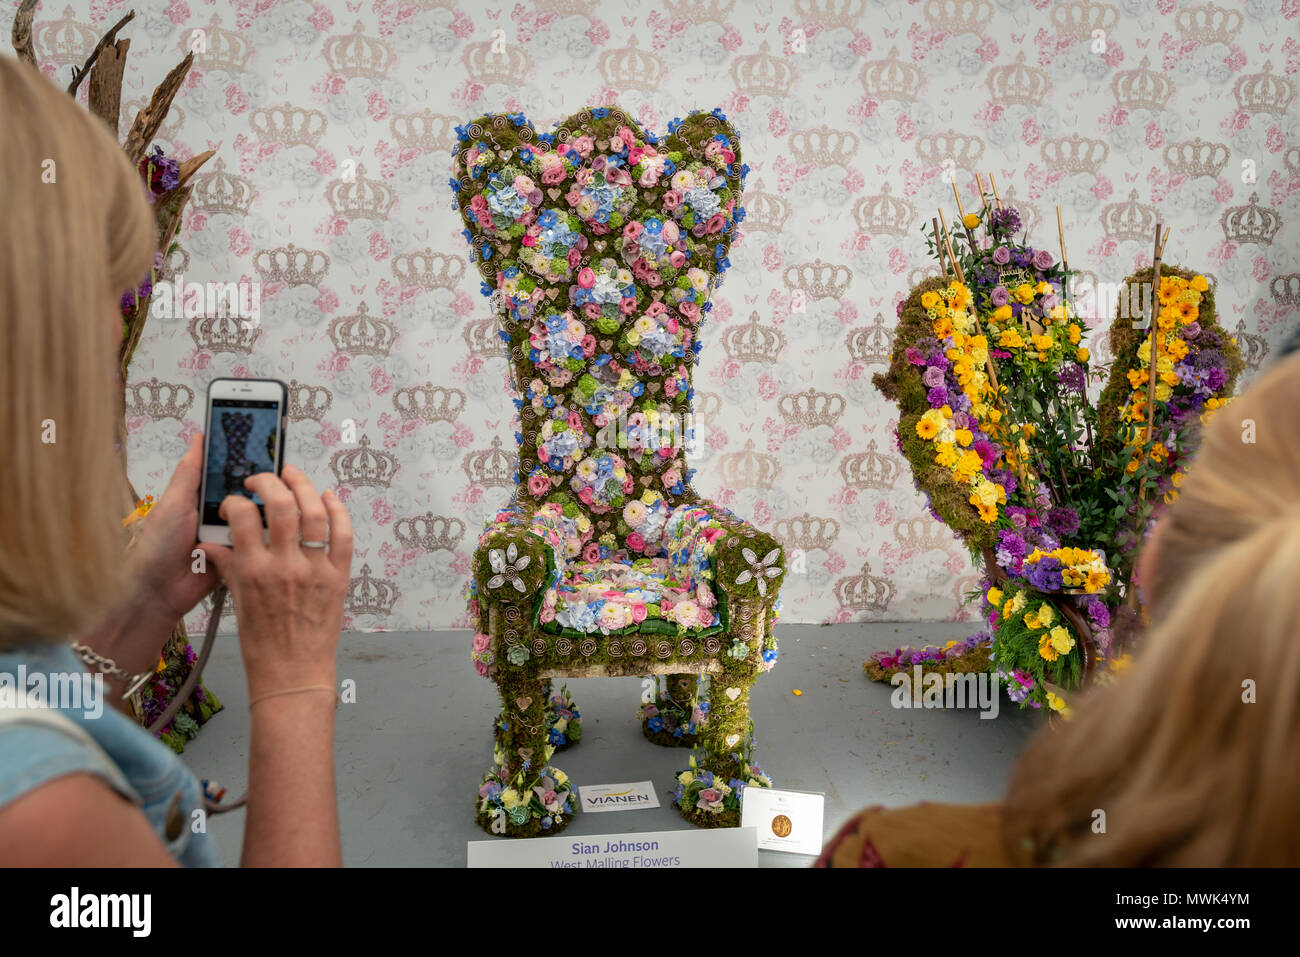 A Visitor To The Rhs Chelsea Flower Show Takes A Photograph Of